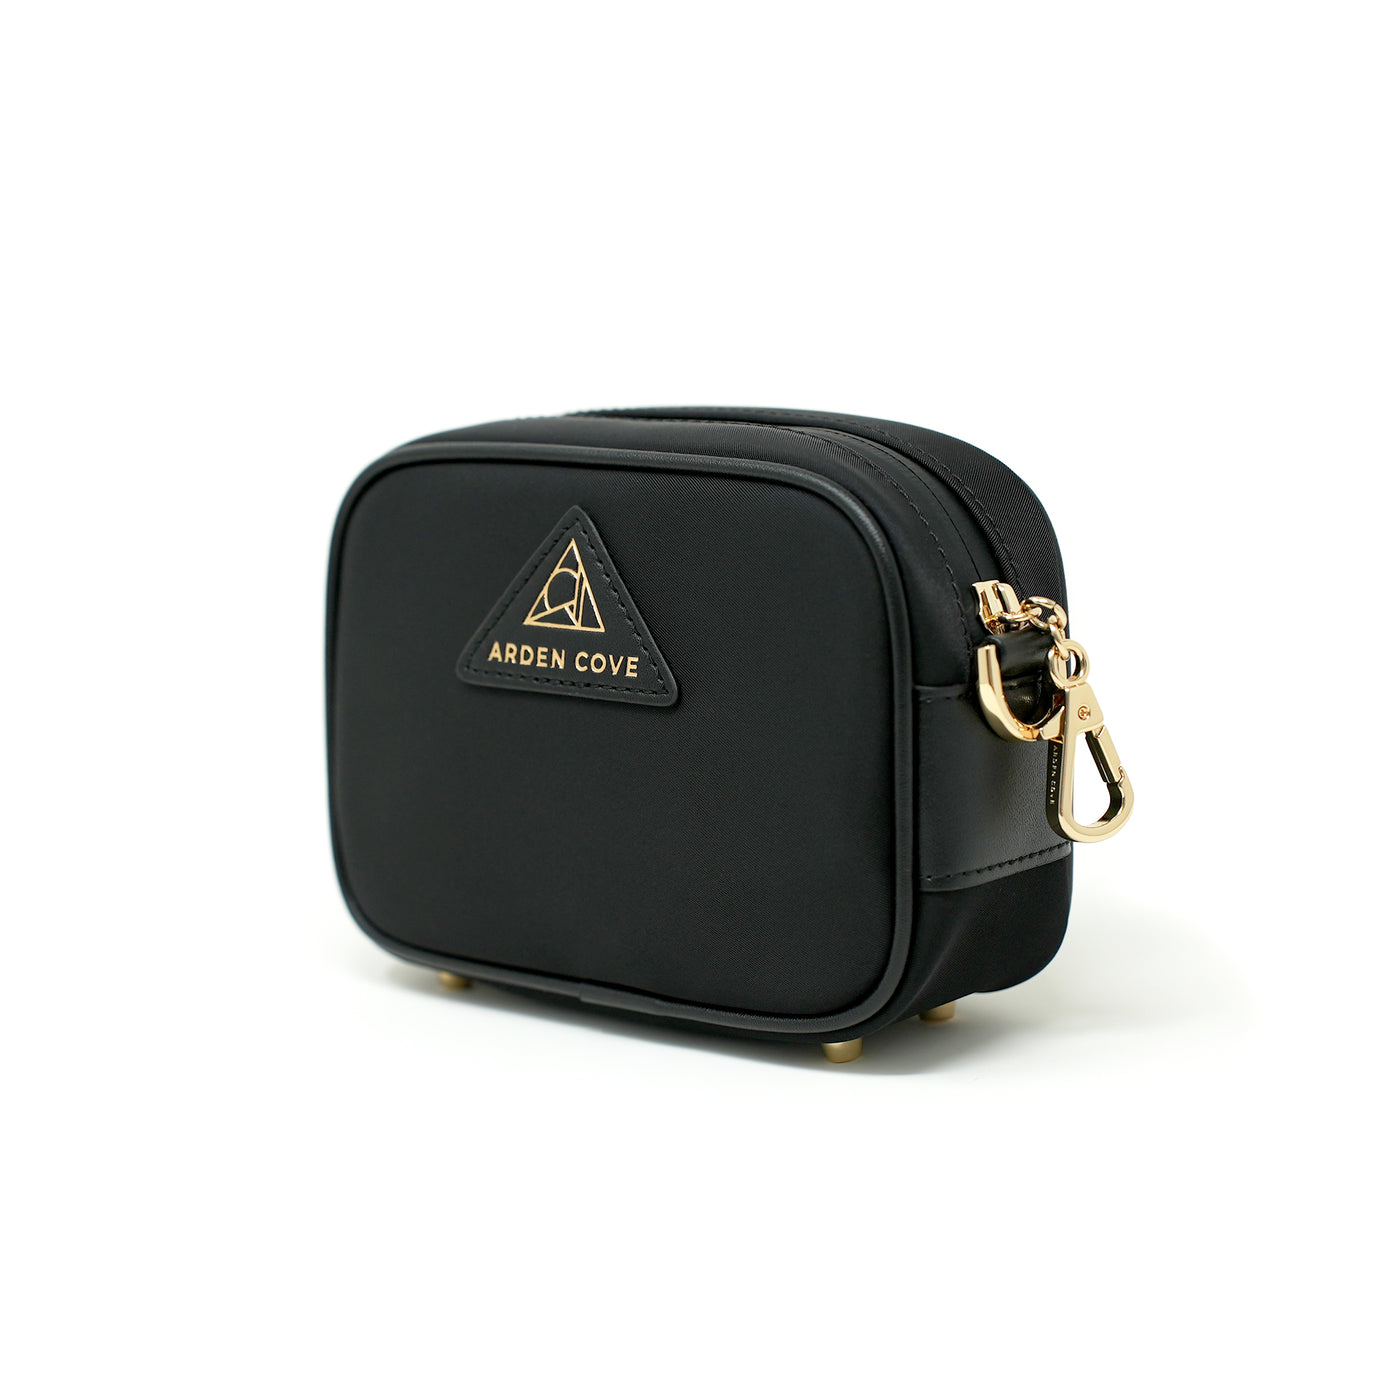 Anti-theft Water-resistant Travel Crossbody - Crissy Mini Crossbody in Black Gold  - side view - Arden Cove